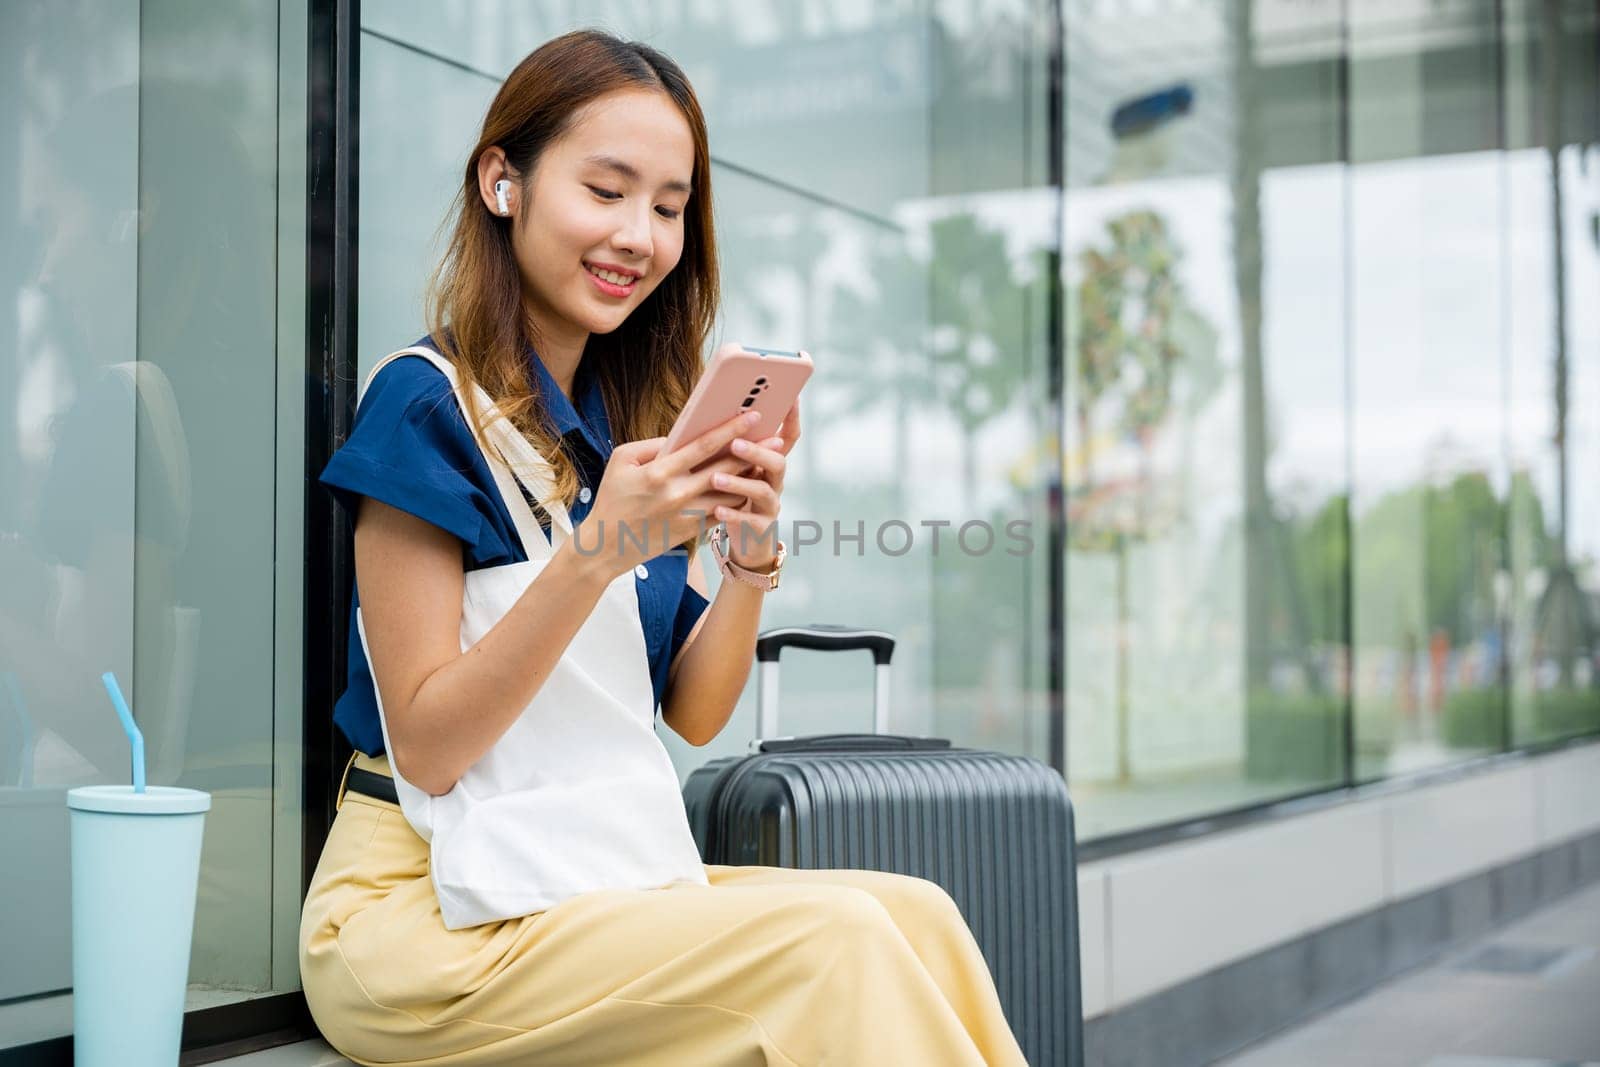 A woman sitting with her suitcase, using her mobile phone to send messages and stay connected while waiting for transportation in the city. She is modern and connected.